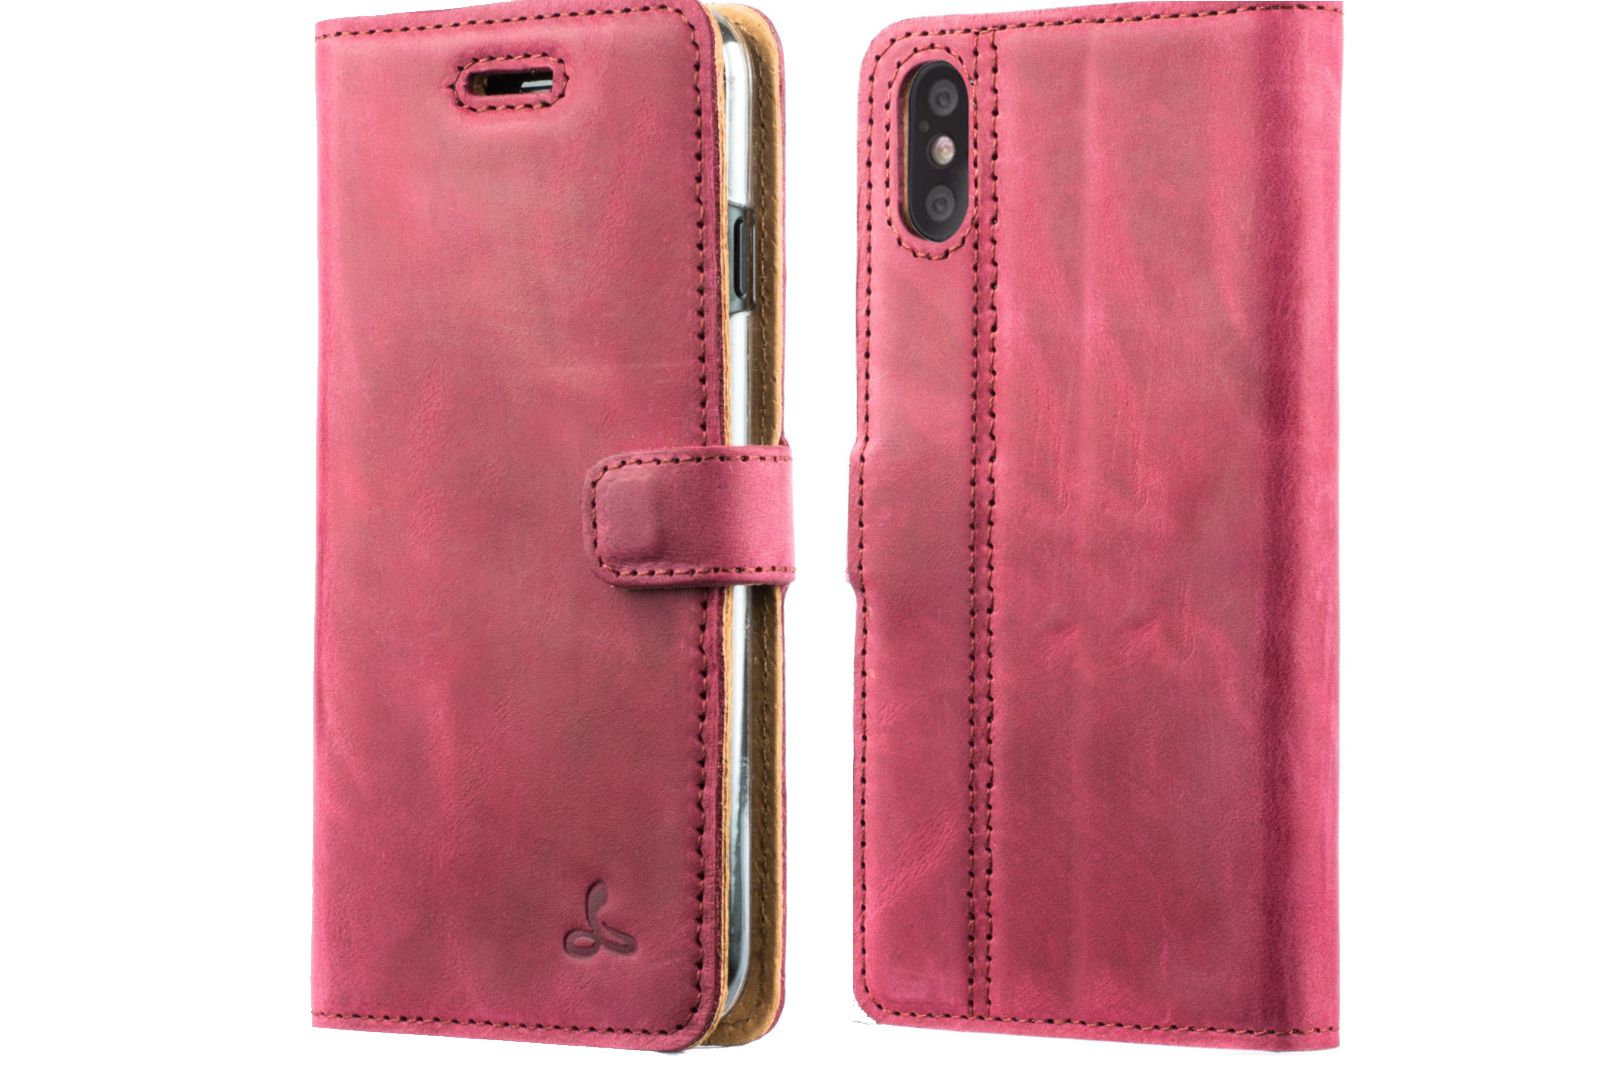 Best iPhone X cases Protect your new Apple device image 13